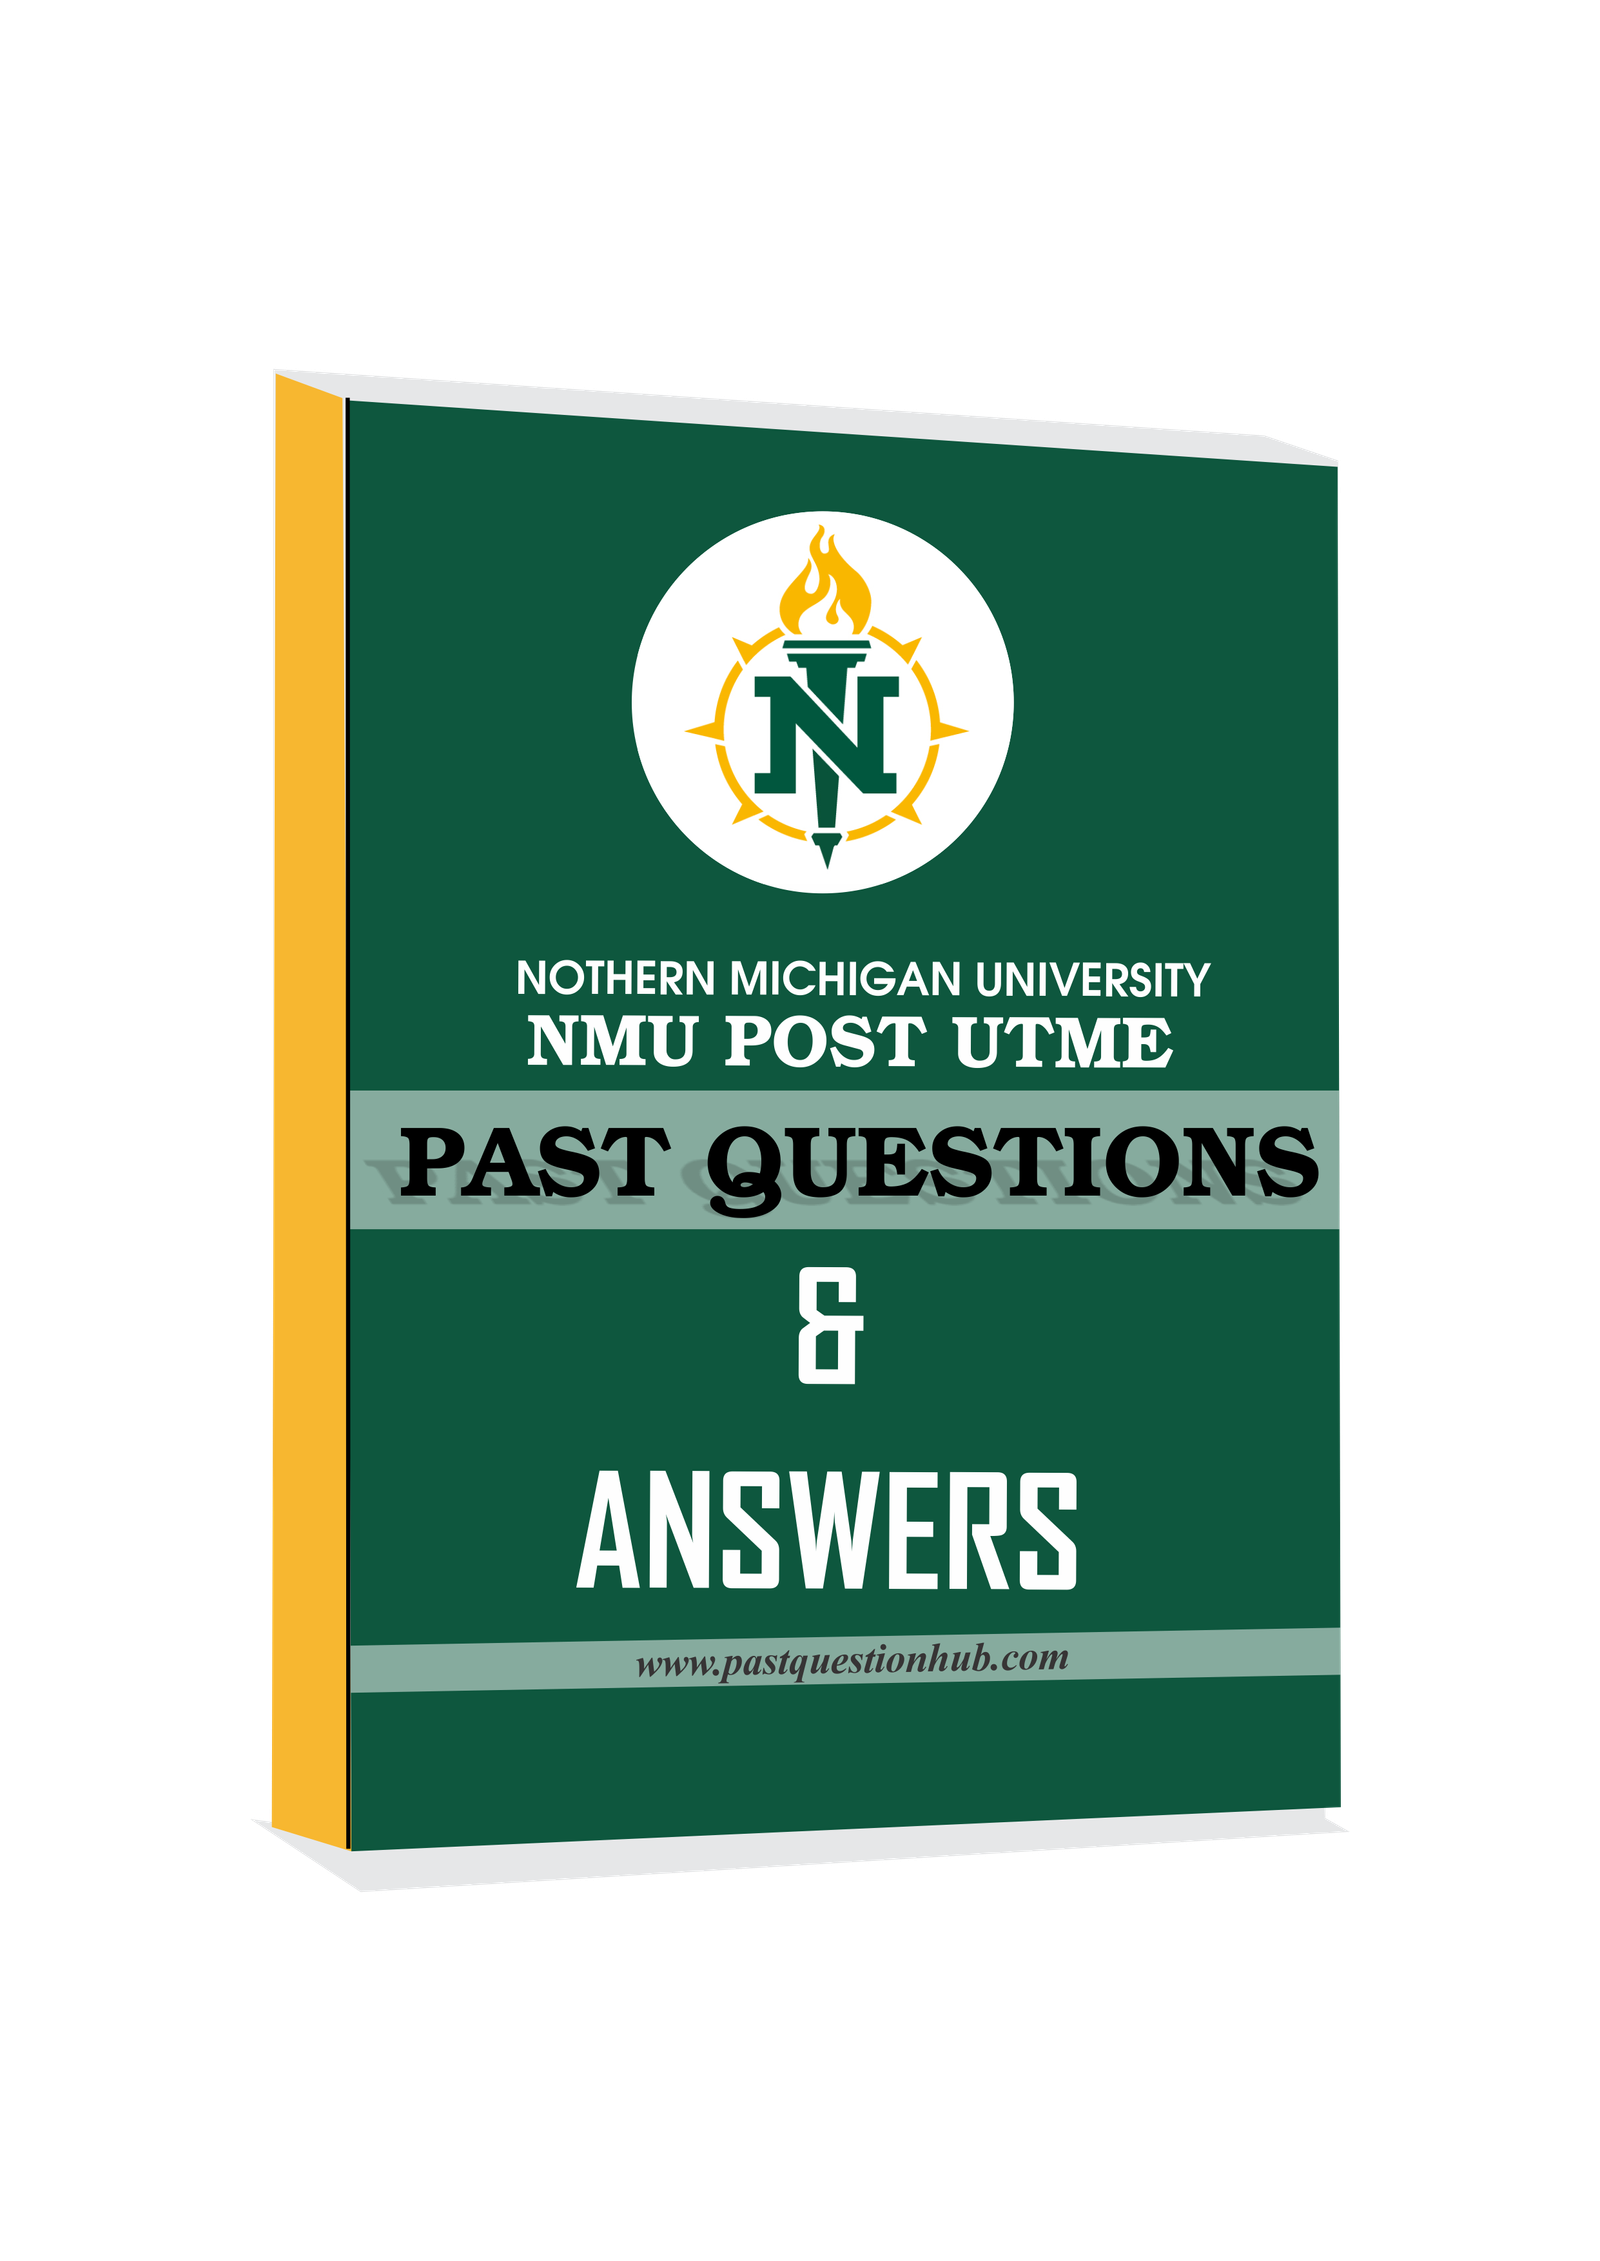 NMU Post UTME Past Questions